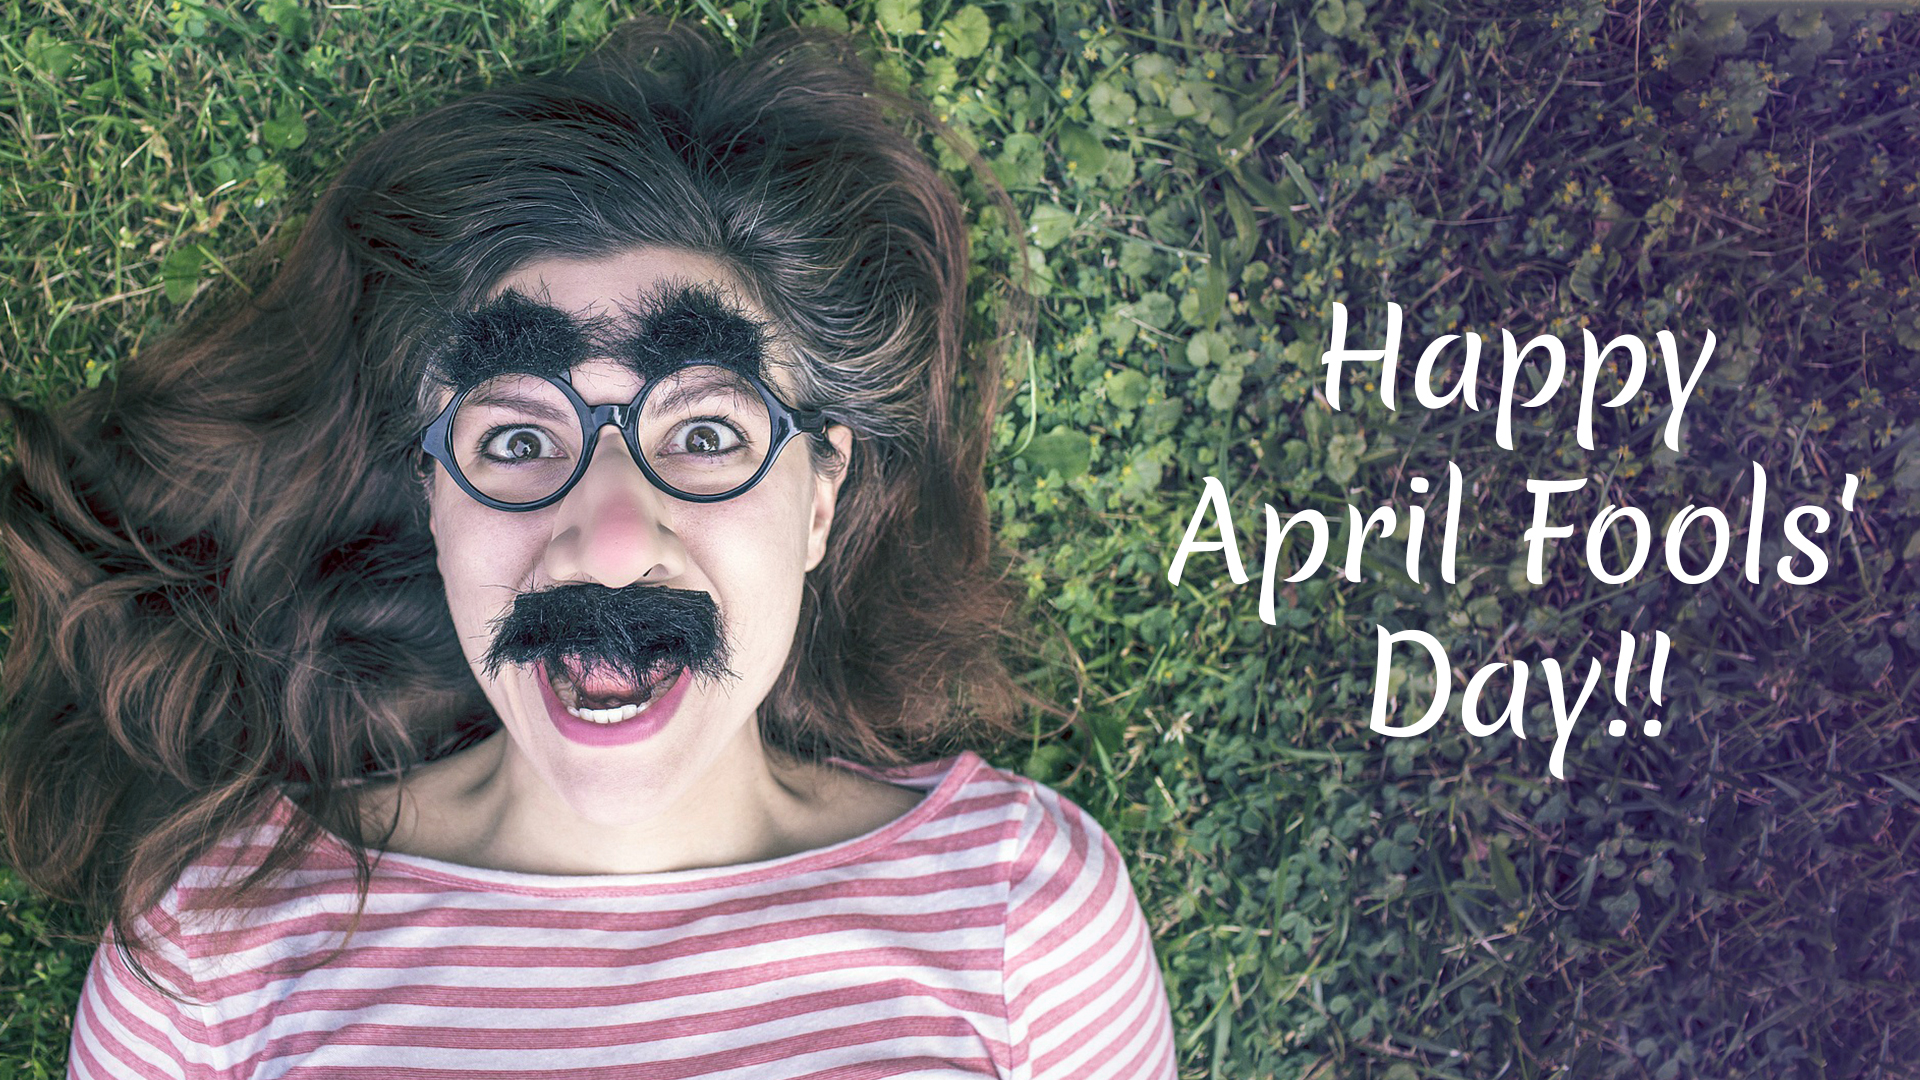 April Fools Day Images Funny Jokes Download For Free Online Best Whatsapp Stickers New Prank Gif Videos To Wish Happy April Fools Day 2019 Latestly